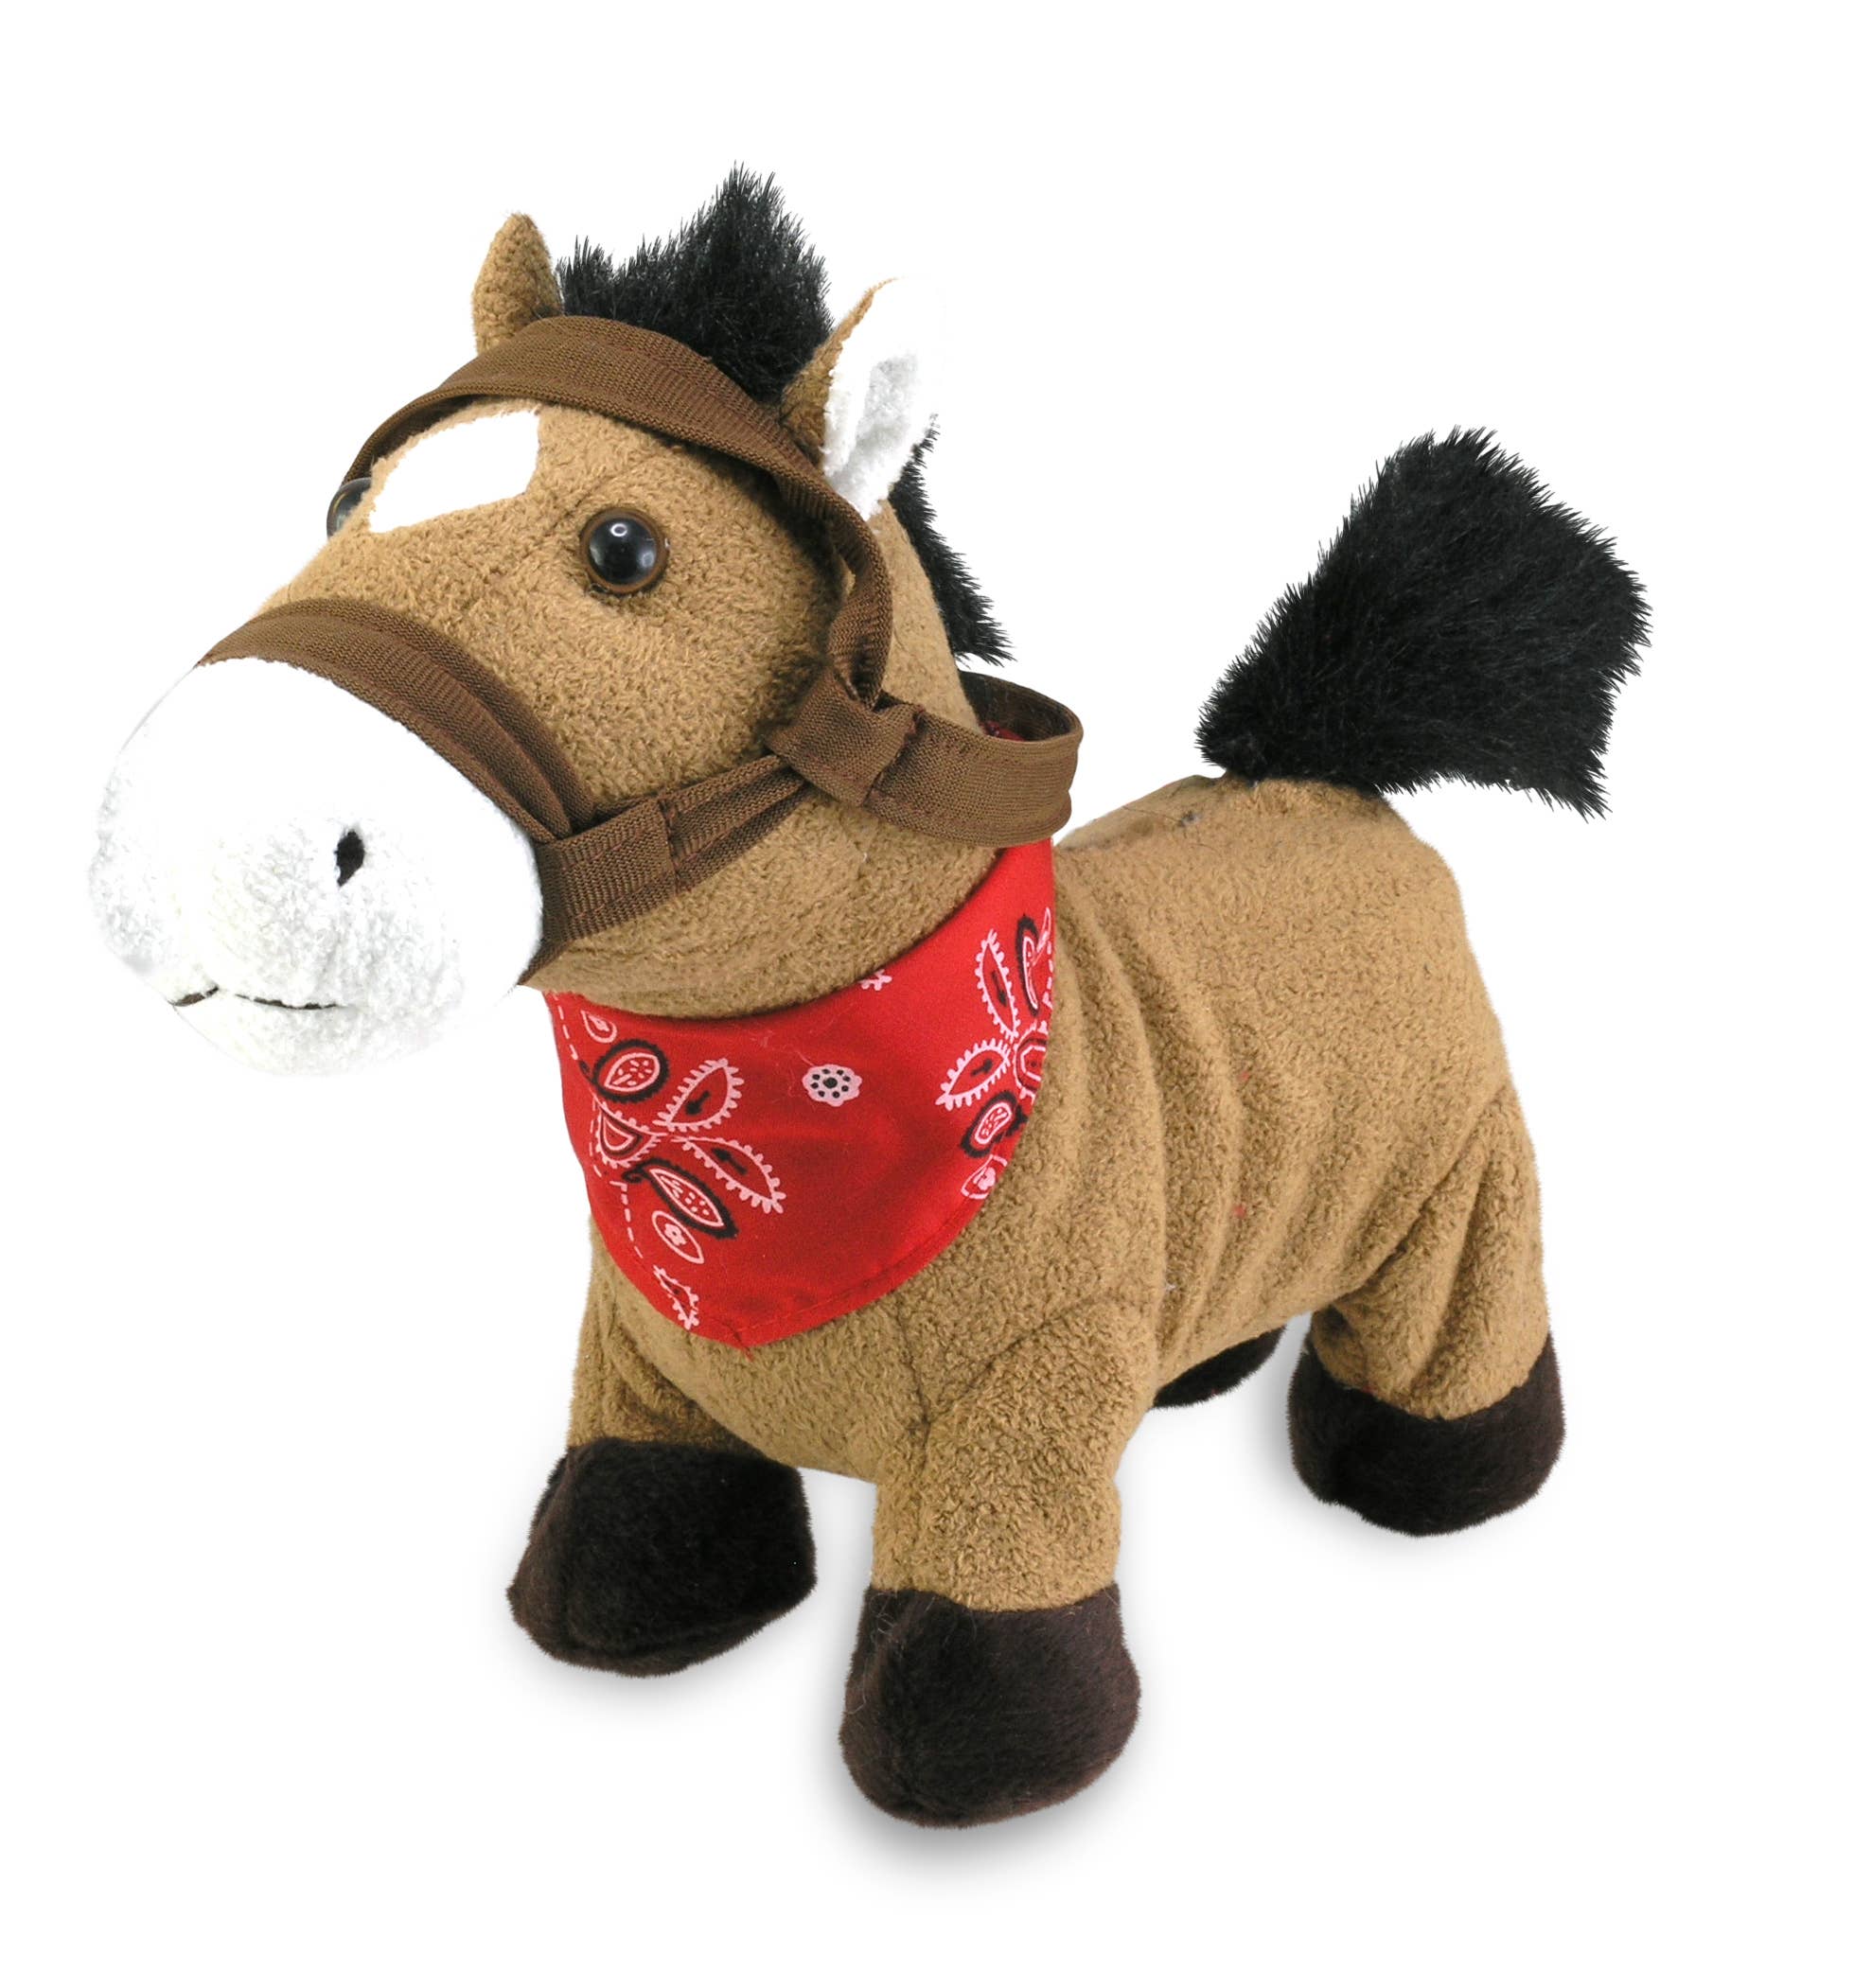 Wholesale Gallop (Cute Singing Walking Horse Kids Plush Toy) for